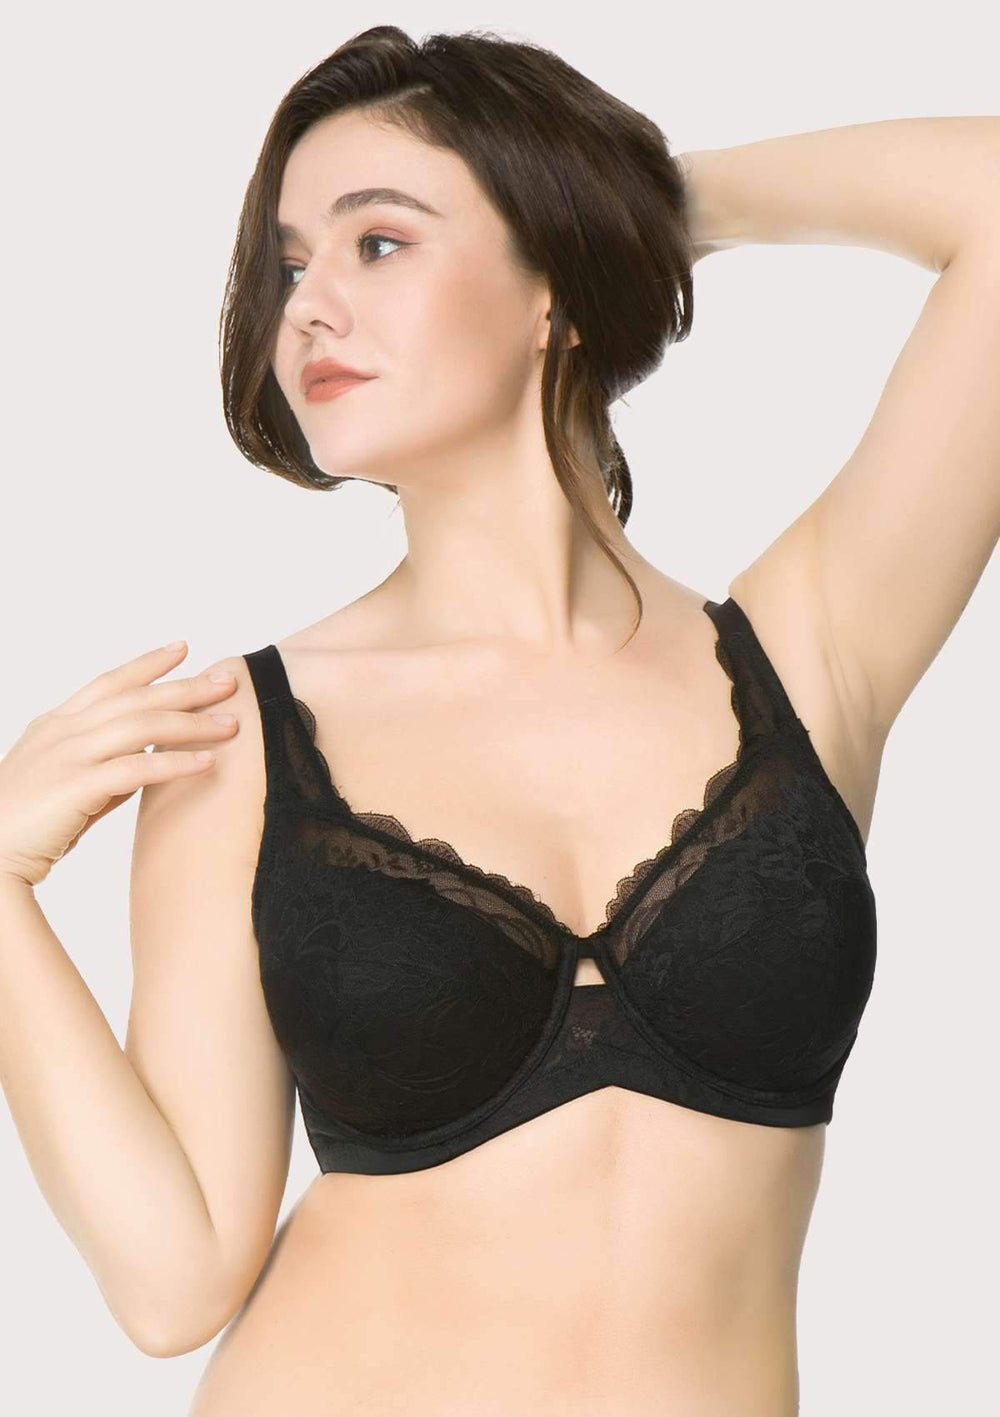 TRIUMPH Minimizer 75 W Women Minimizer Non Padded Bra - Buy TRIUMPH  Minimizer 75 W Women Minimizer Non Padded Bra Online at Best Prices in  India